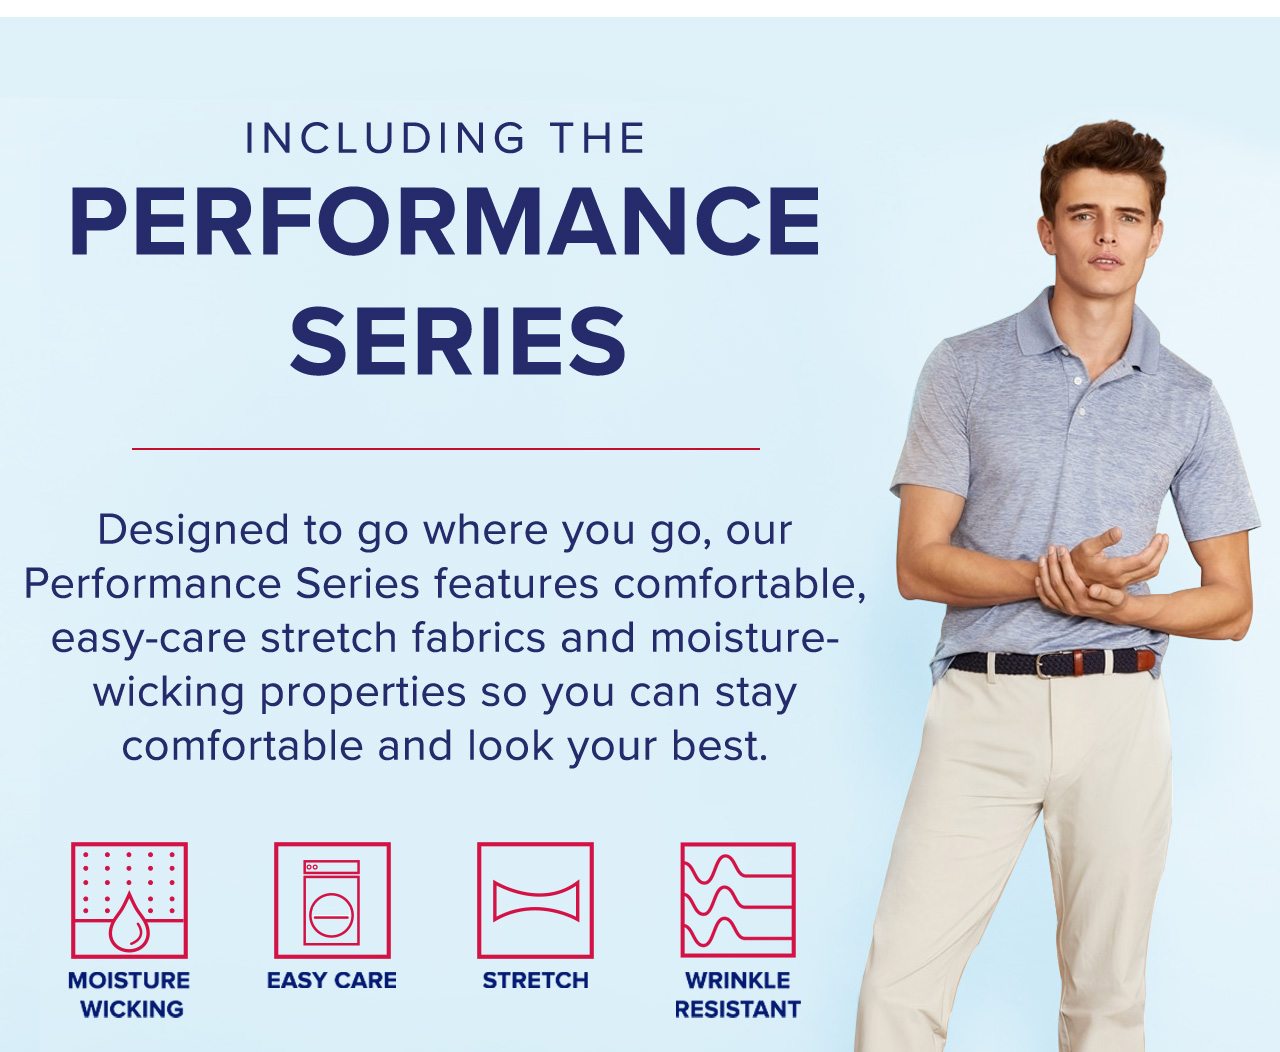 Including The Performance Series Designed to go where you go, our Performance Series features comfortable, easy-care stretch fabrics and moisture-wicking properties so you can stay comfortable and look your best.